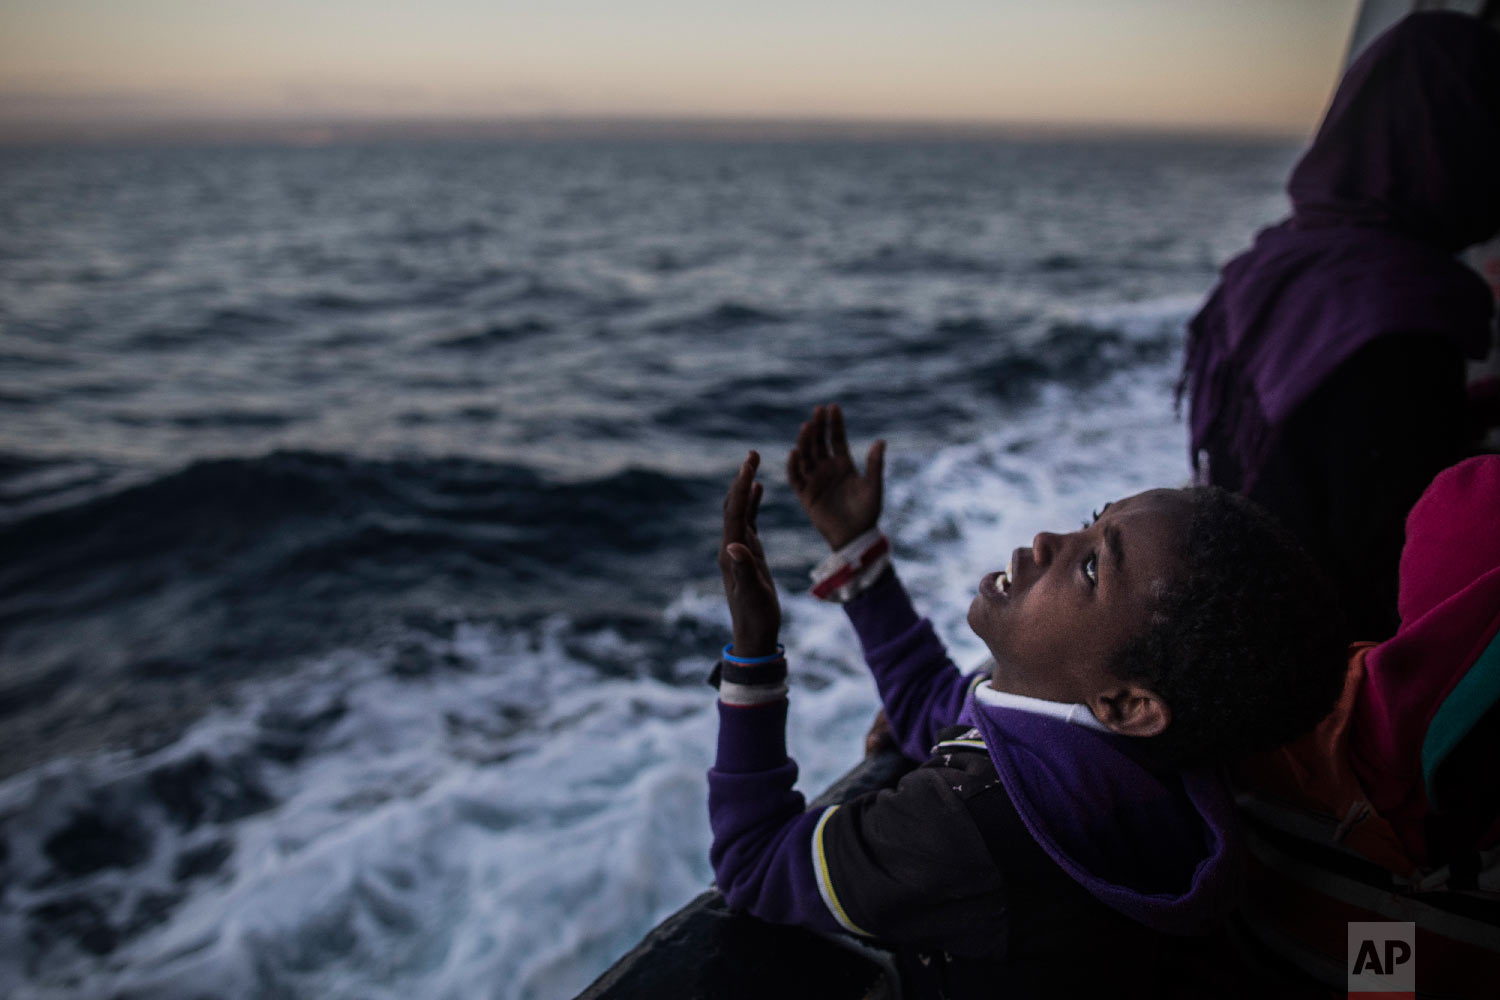  A child from Eritrea sings to celebrate his arrival to Europe aboard the Spanish NGO Proactiva Open Arms rescue vessel near Pozzallo, Sicily, Italy on Jan. 18, 2018. (AP Photo/Santi Palacios) 